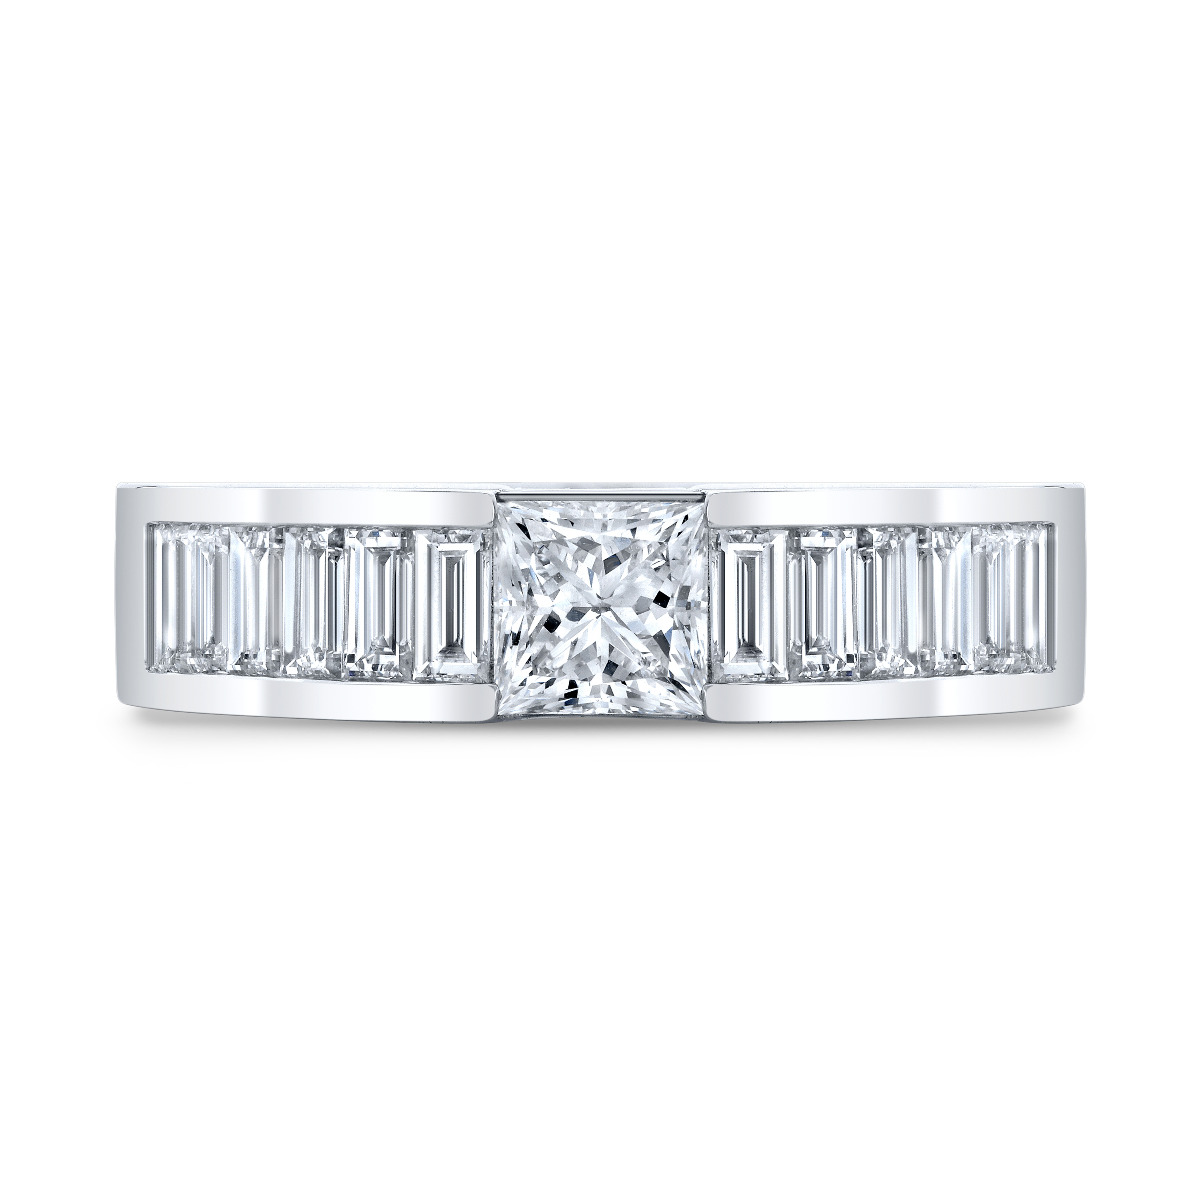 12 Baguette-cut diamonds on a white gold wide band with a beautiful Princess cut center stone.